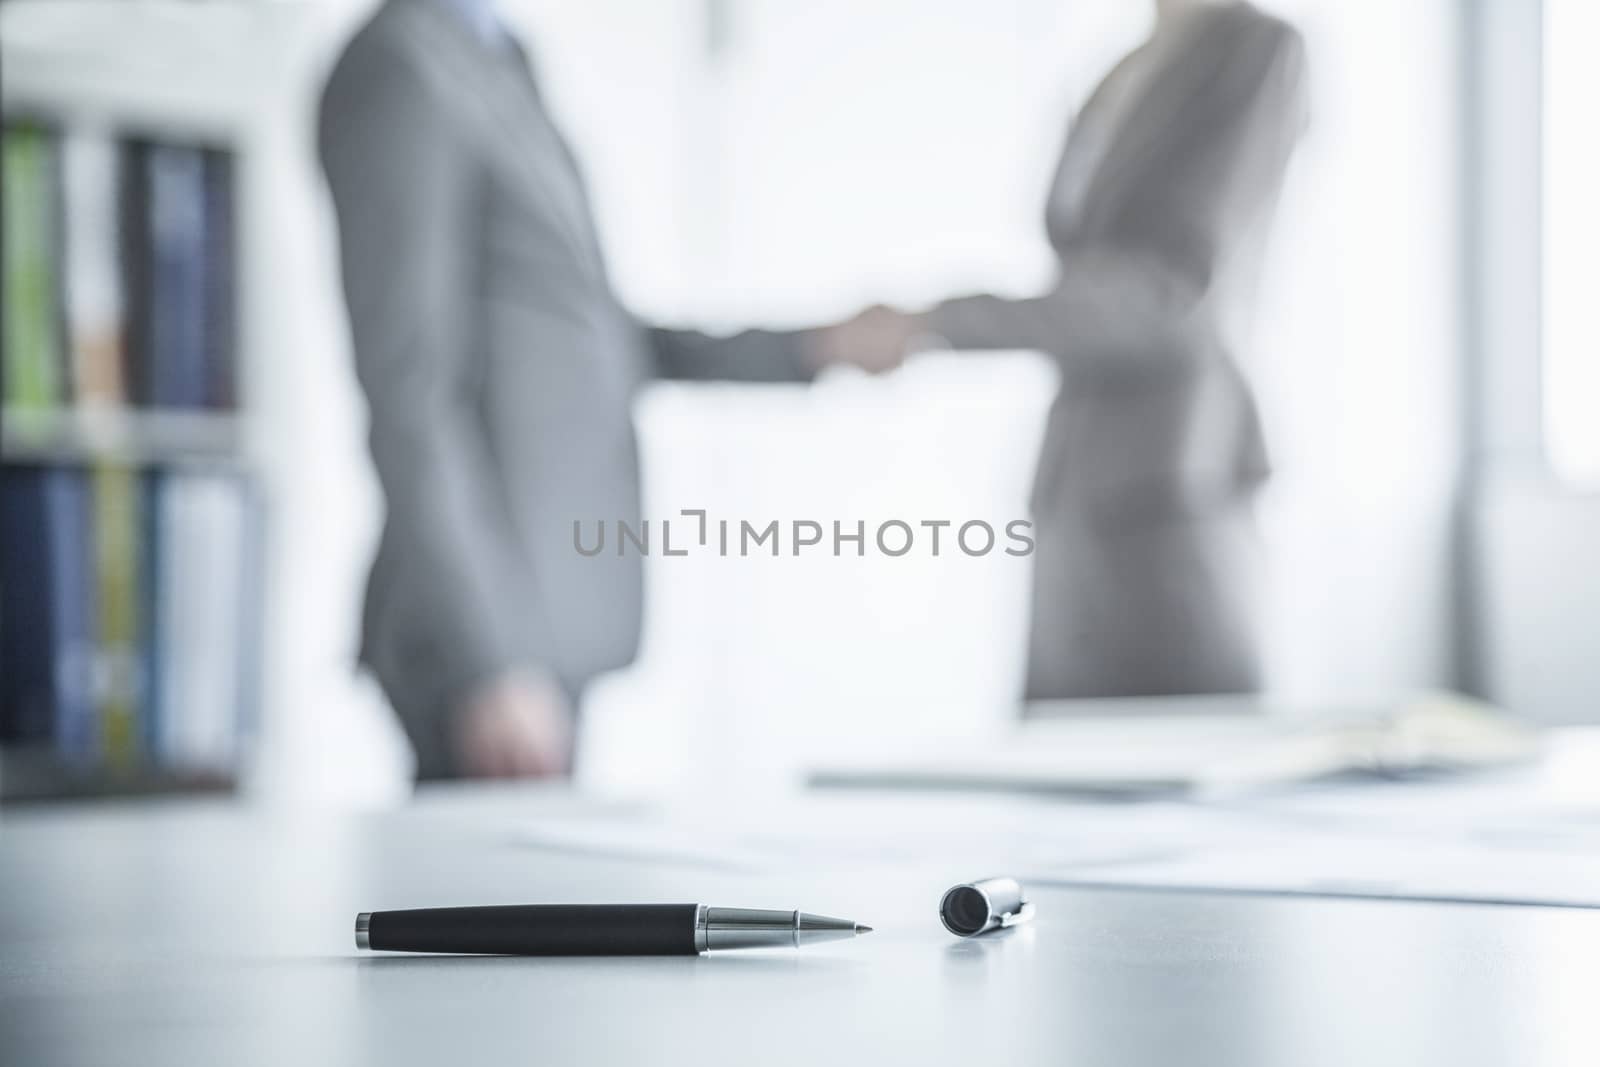 Two business people shaking hands in the background, pen lying on the table in the foreground